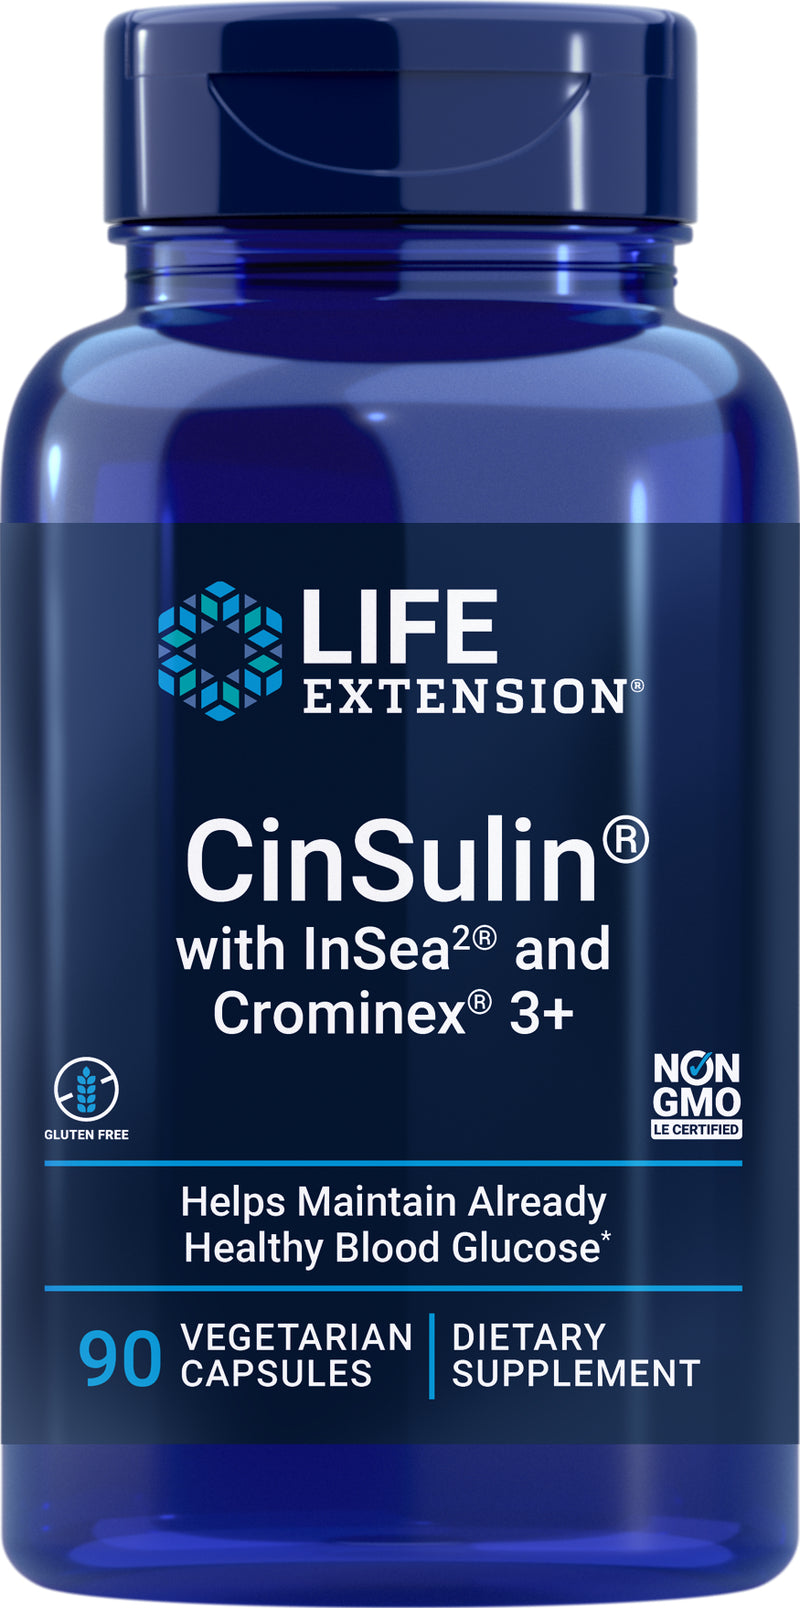 CinSulin® with InSea2® and Crominex® 3+90 veg caps by Life Extension